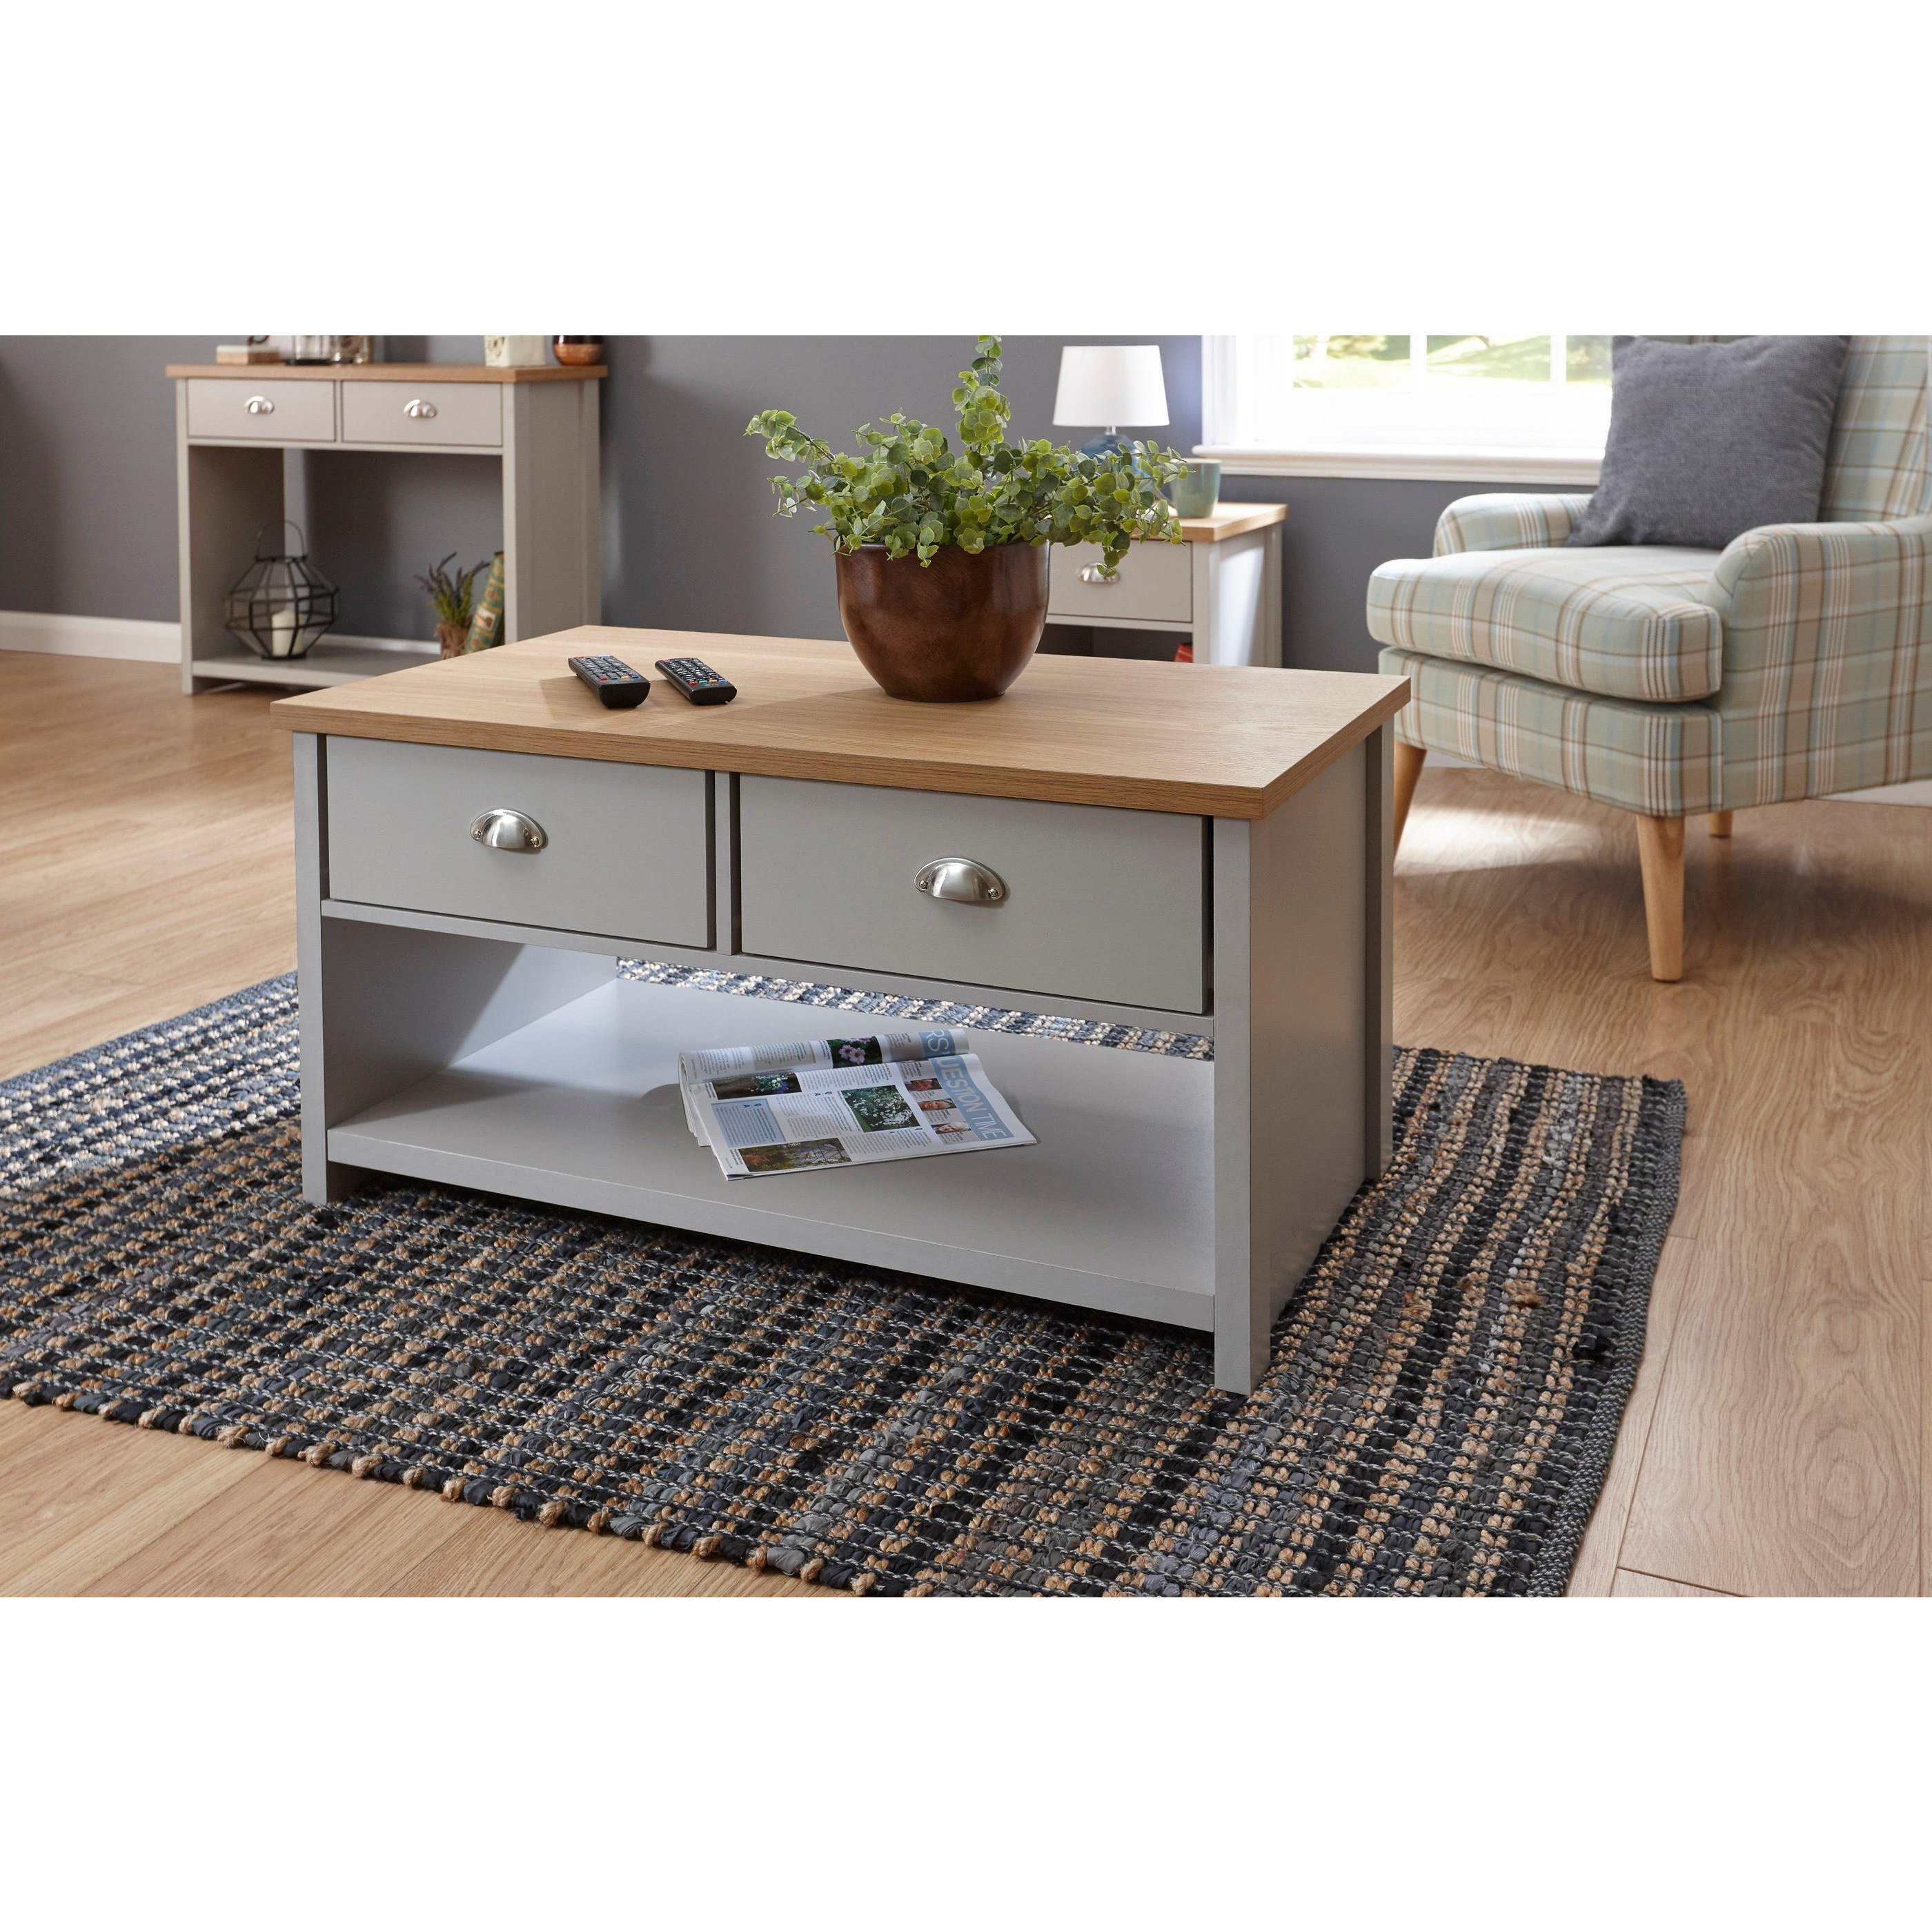 Lancaster 2 Drawer Coffee Table - image 1